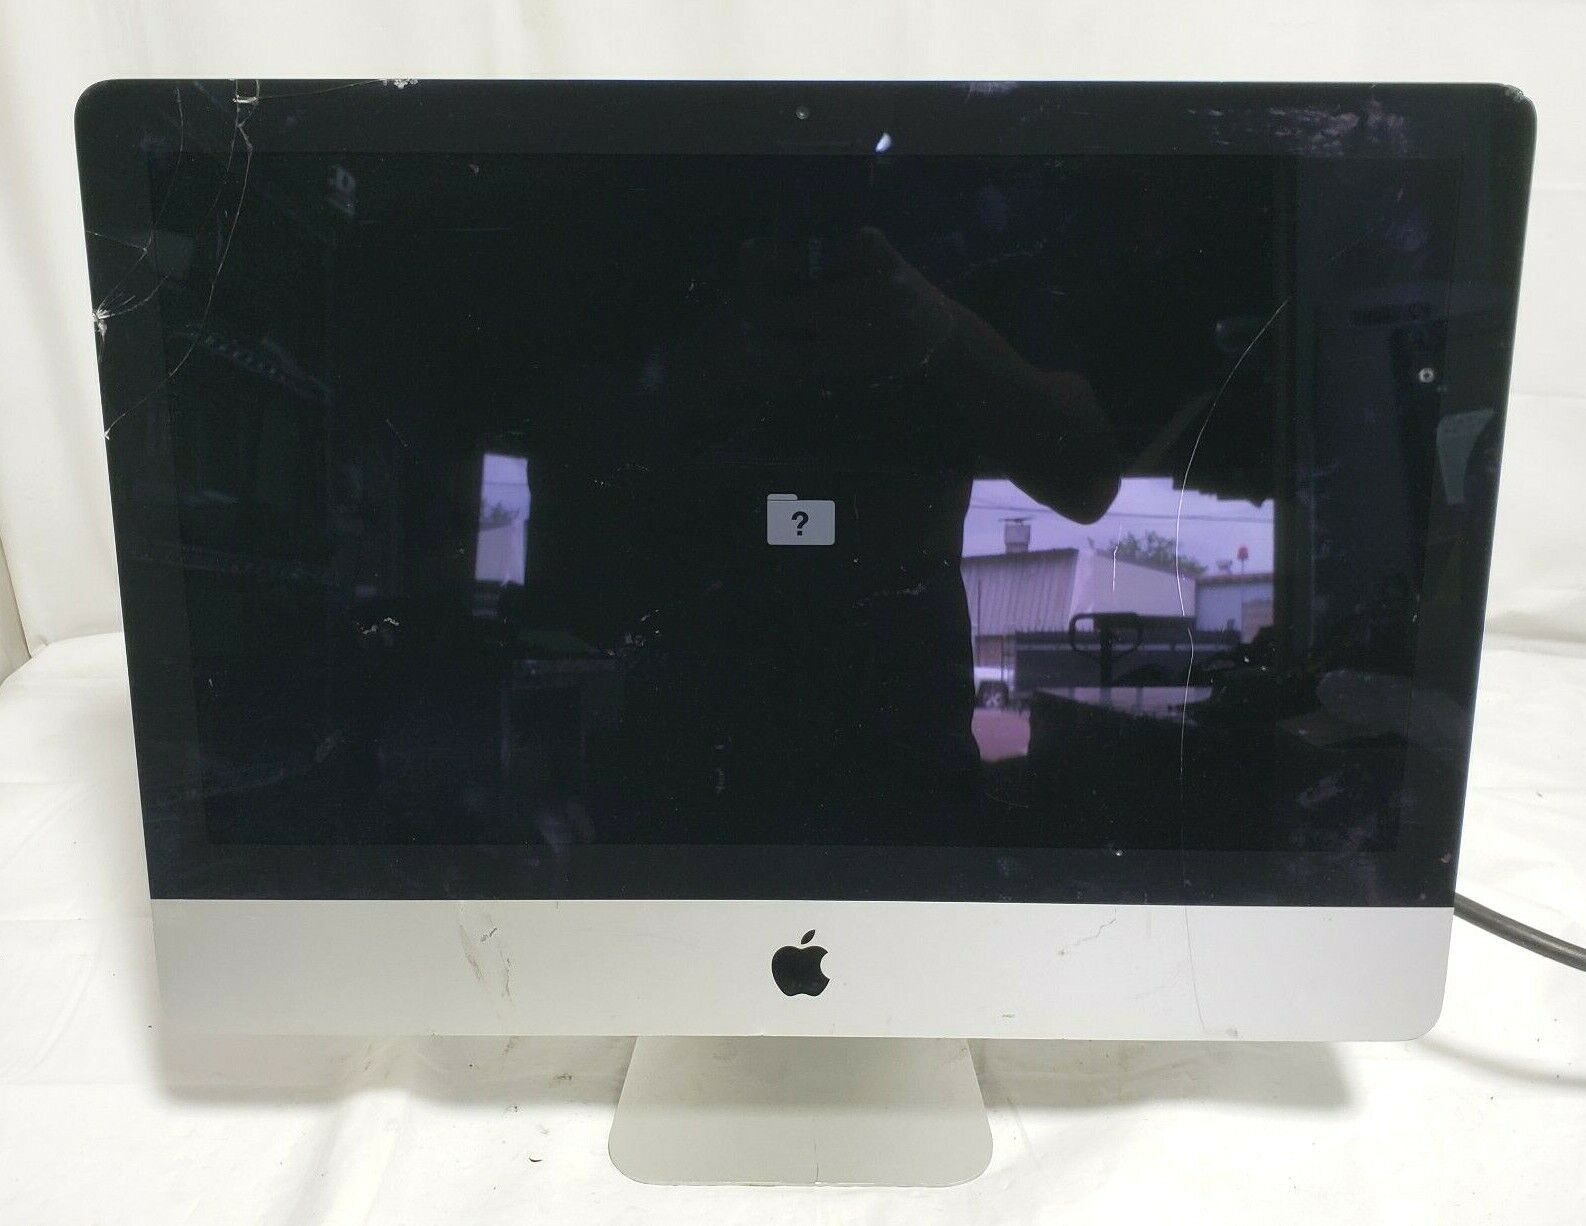 Apple iMac Intel Core 21.5in A1418 Computer CRACKED GLASS UNKNOWN SPECS AS IS 